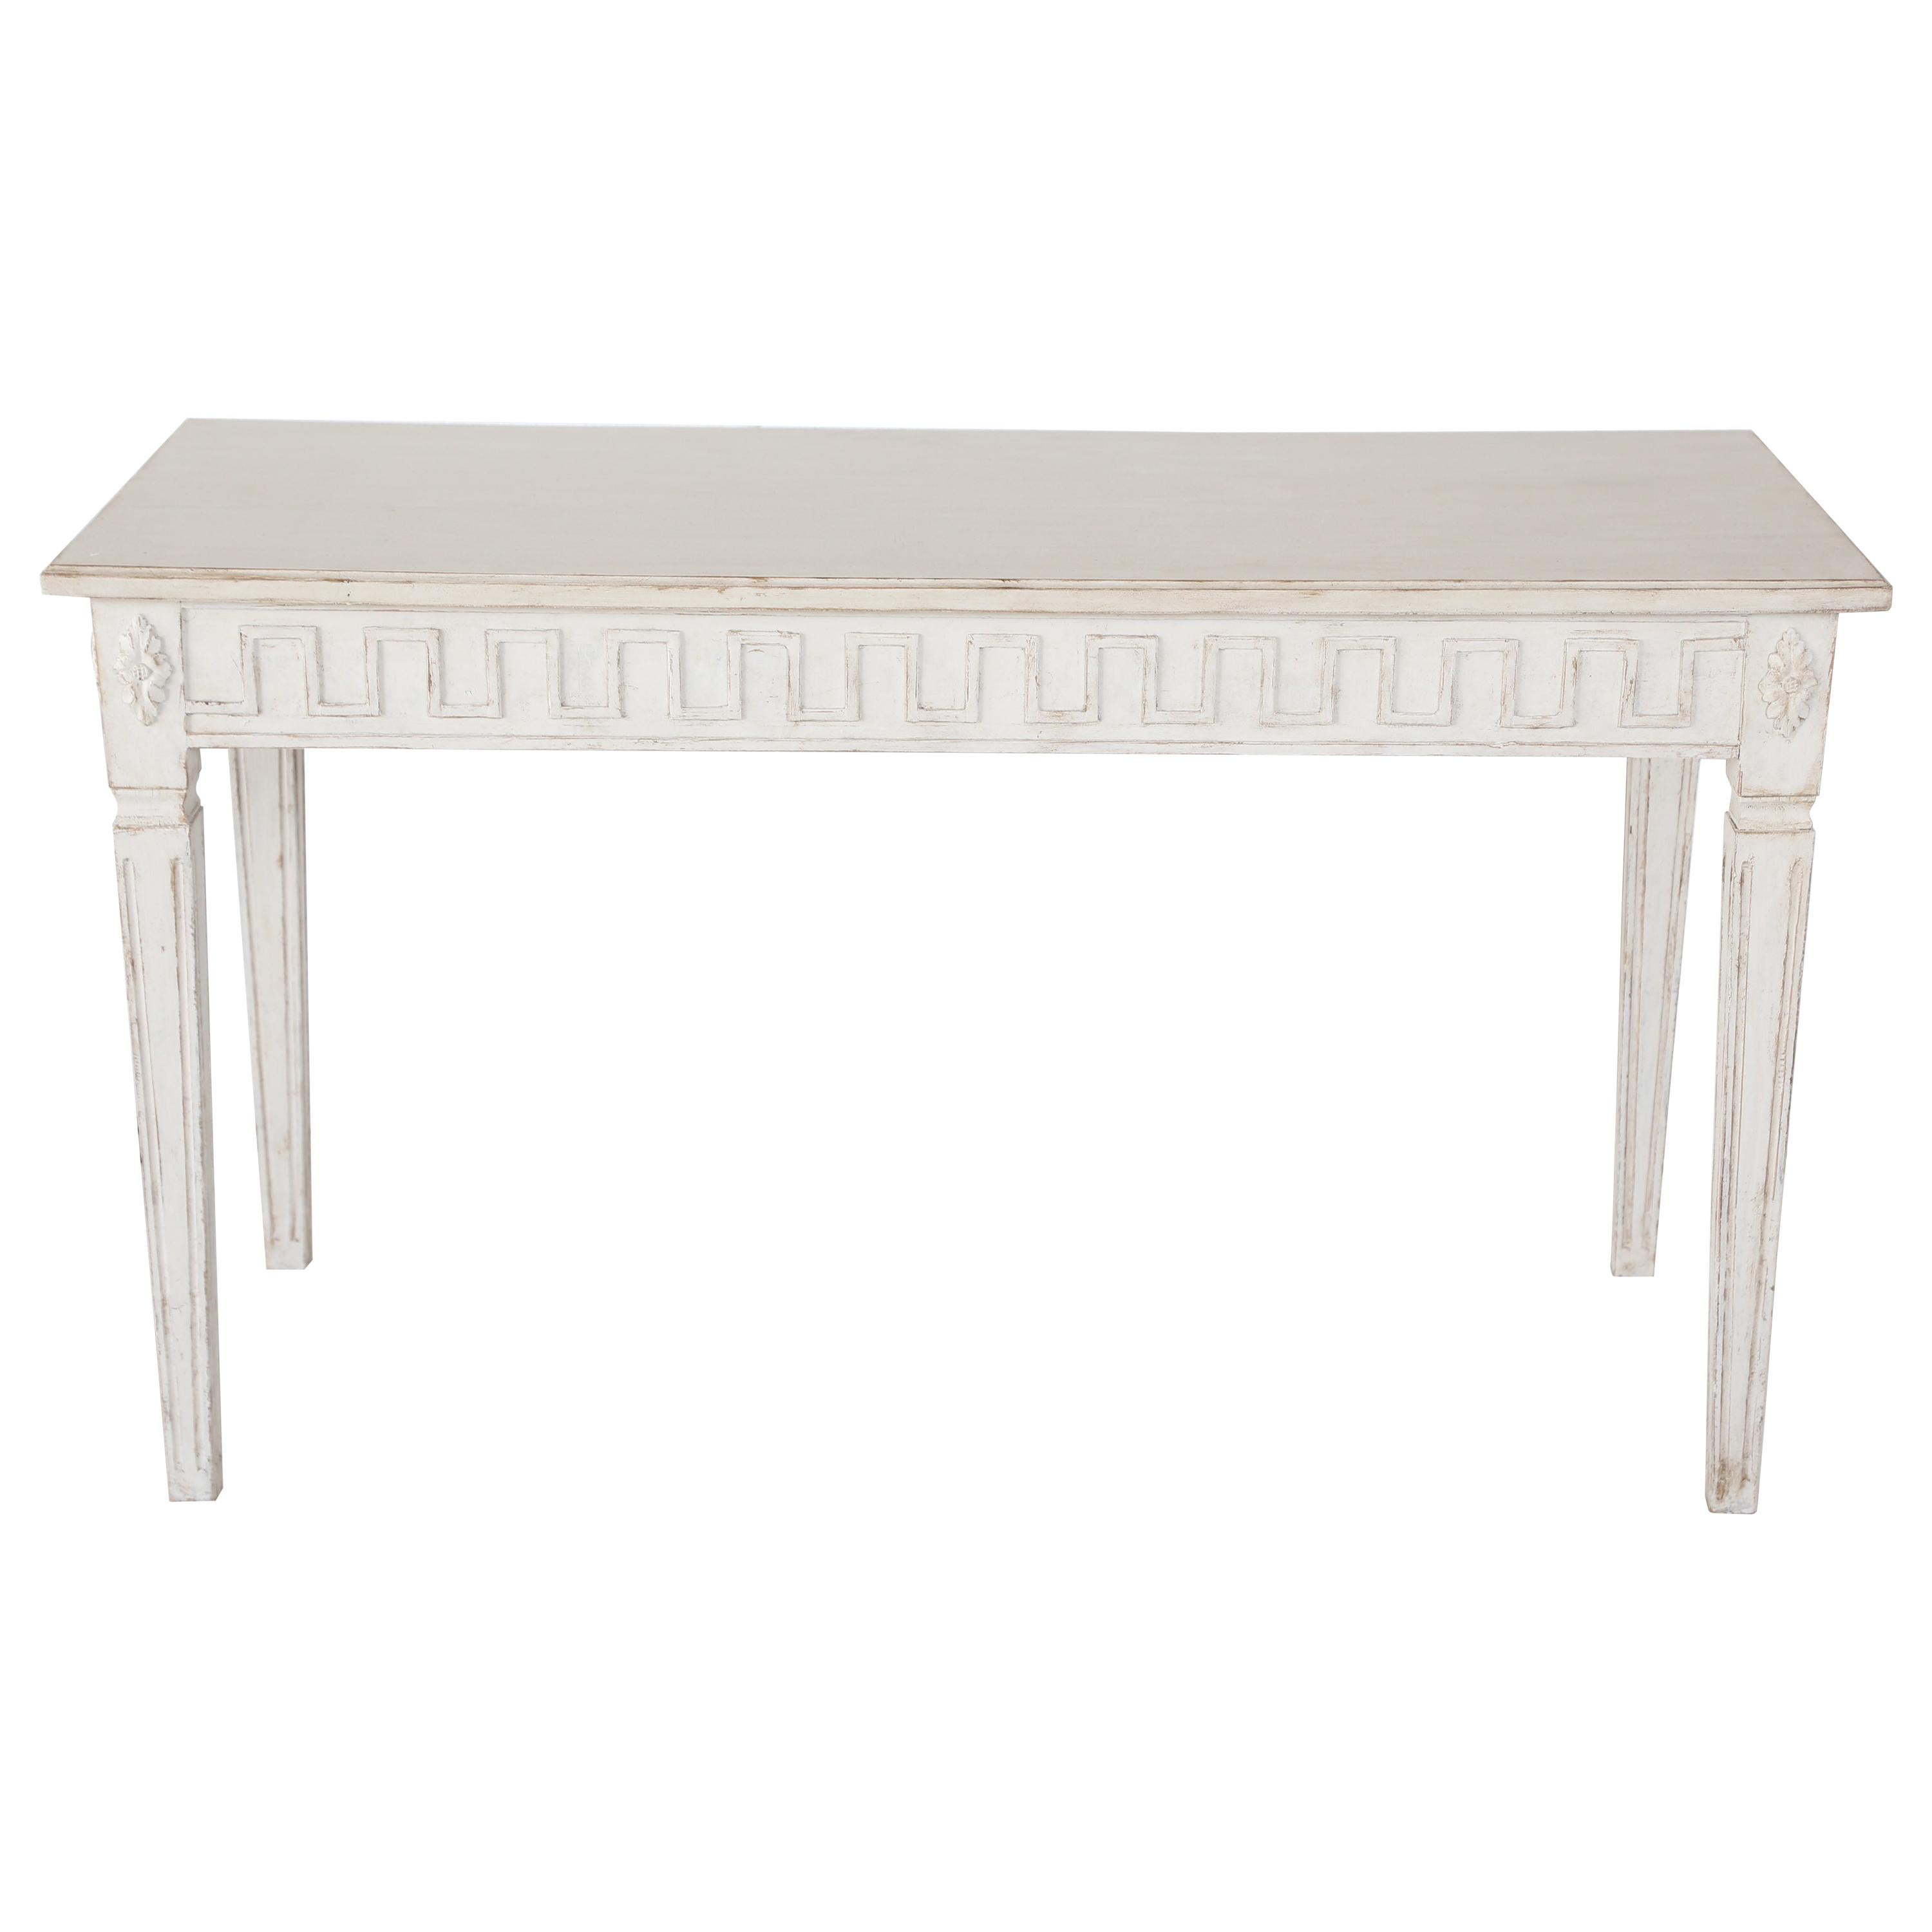 Antique Swedish Gustavian Style Painted Large Console Table, Late 19th Century